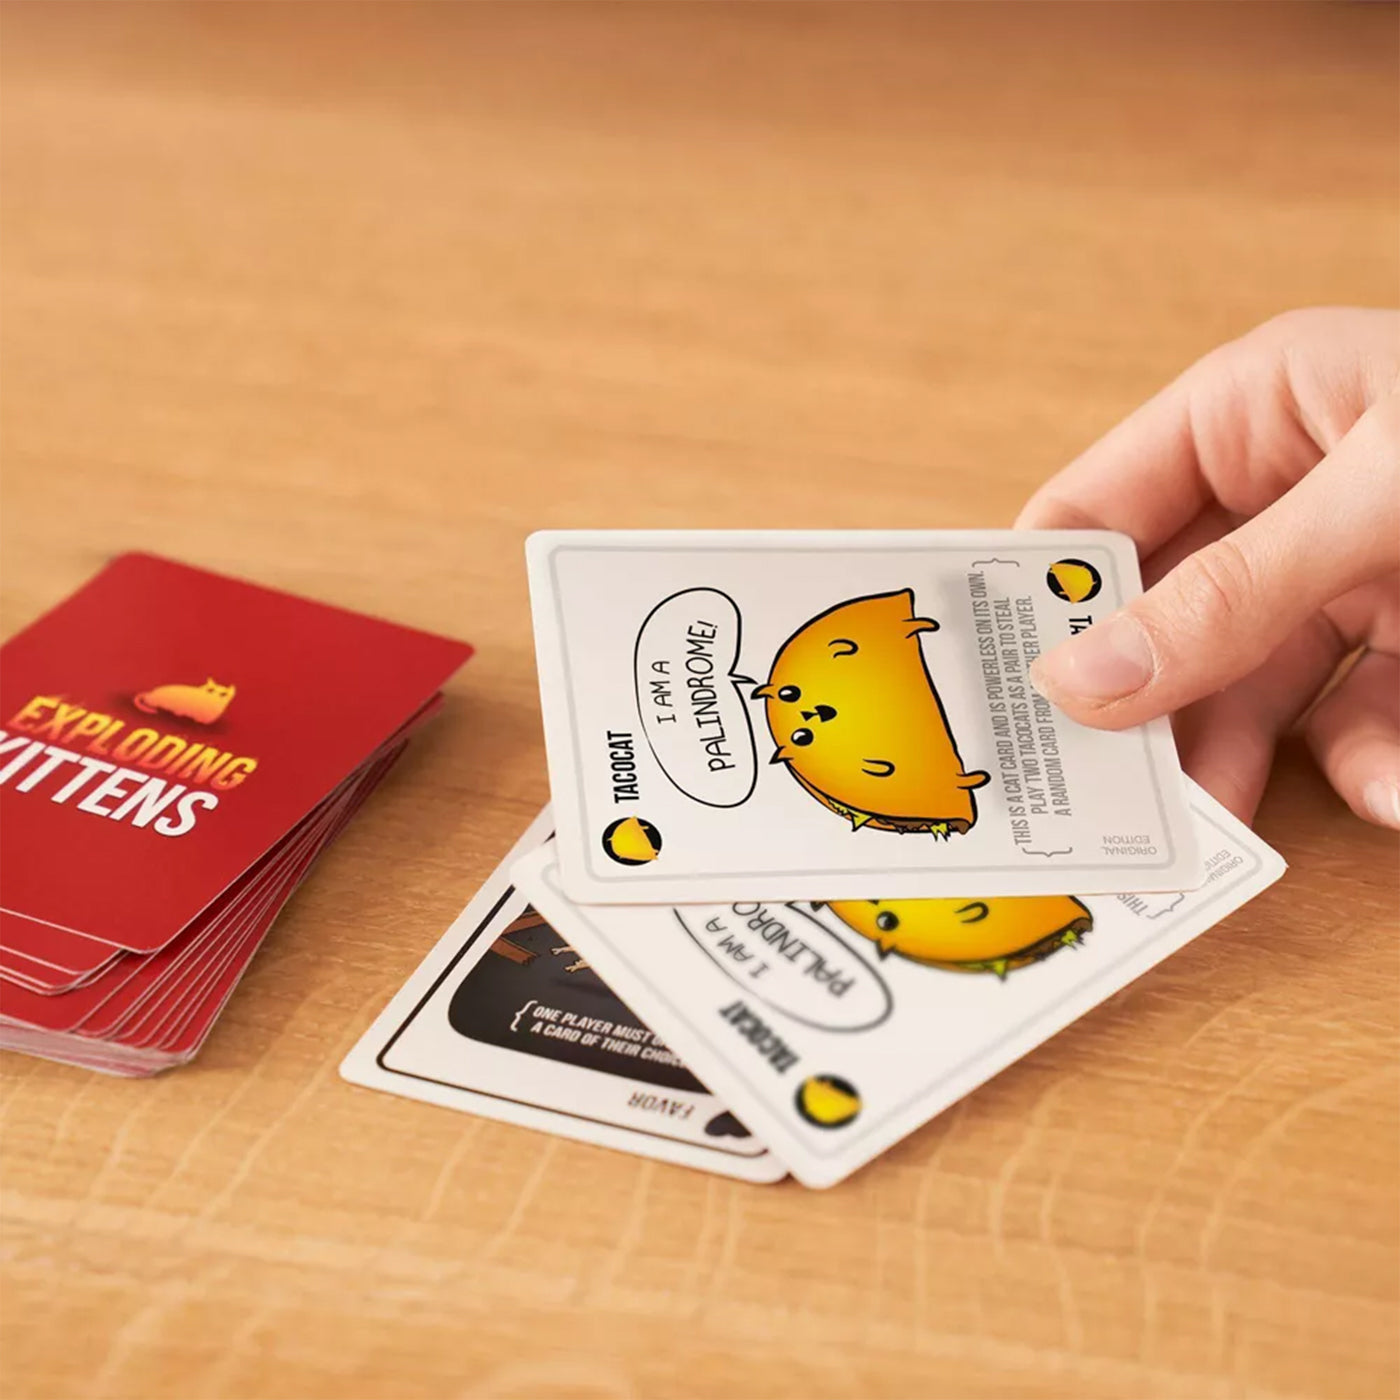 Exploding Kittens: A Card Game